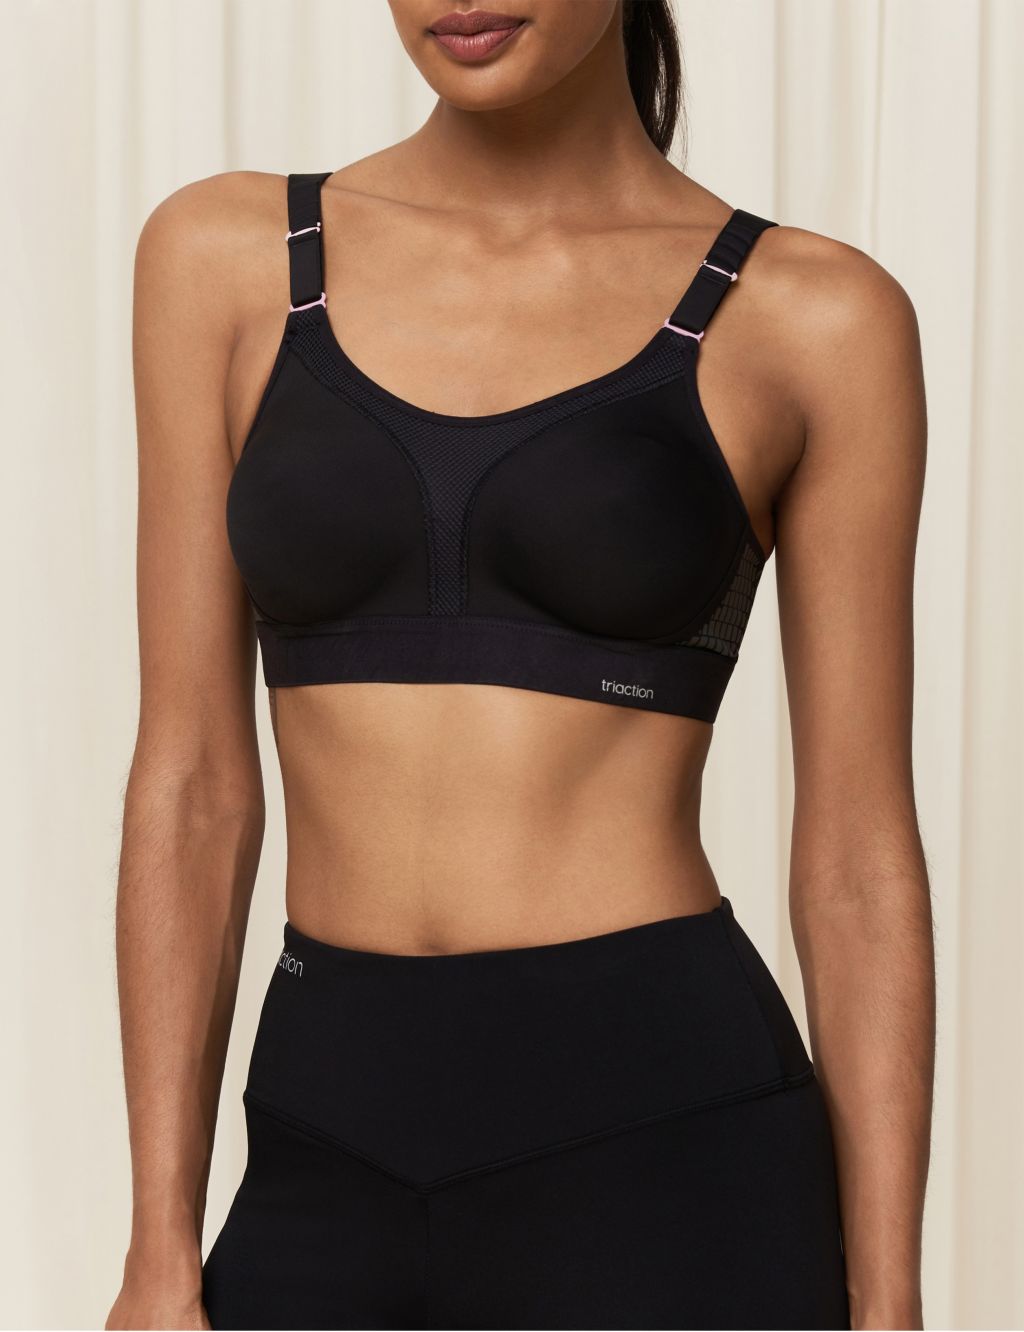 Triaction Extreme Lite Wired Sports Bra image 3